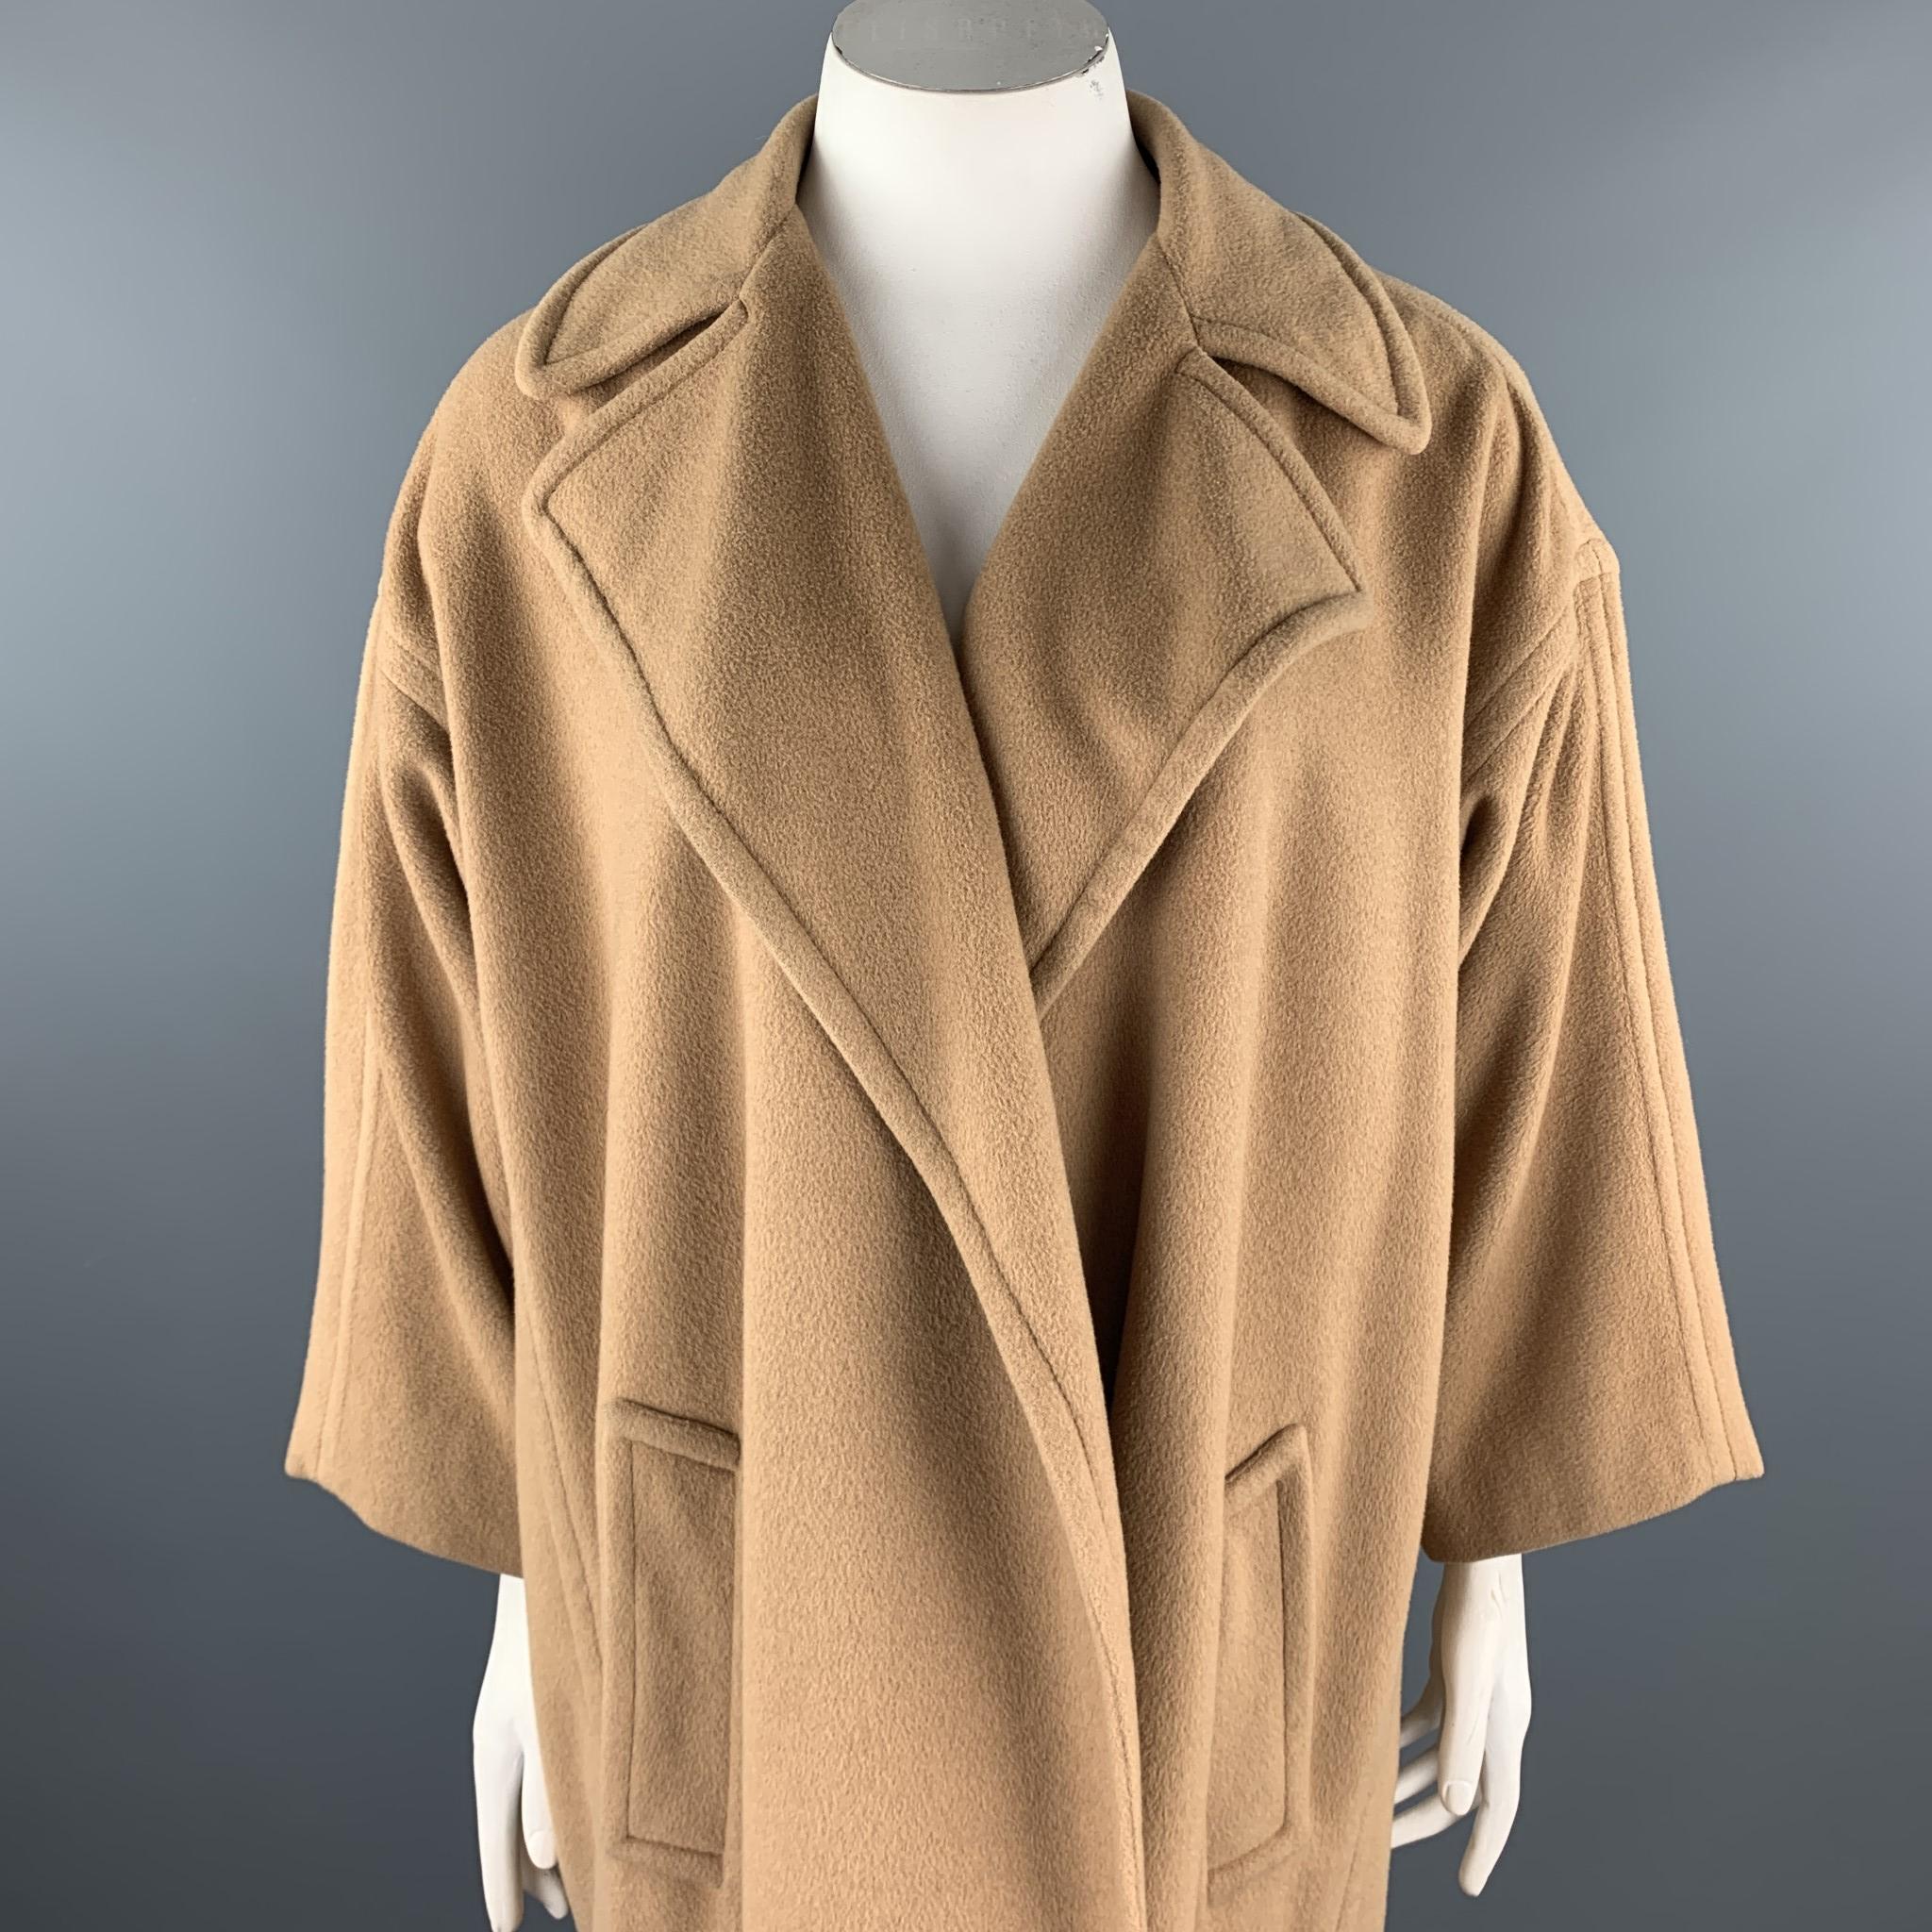 Vintage CALVIN KLEIN coat comes in a camel fabric with a full liner featuring a notch lapel style and a open font closure. Made in USA.

Good Pre-Owned Condition.
Marked: 8

Measurements:

Shoulder: 22 in. 
Chest: 48 in. 
Sleeve: 16.5 in. 
Length: